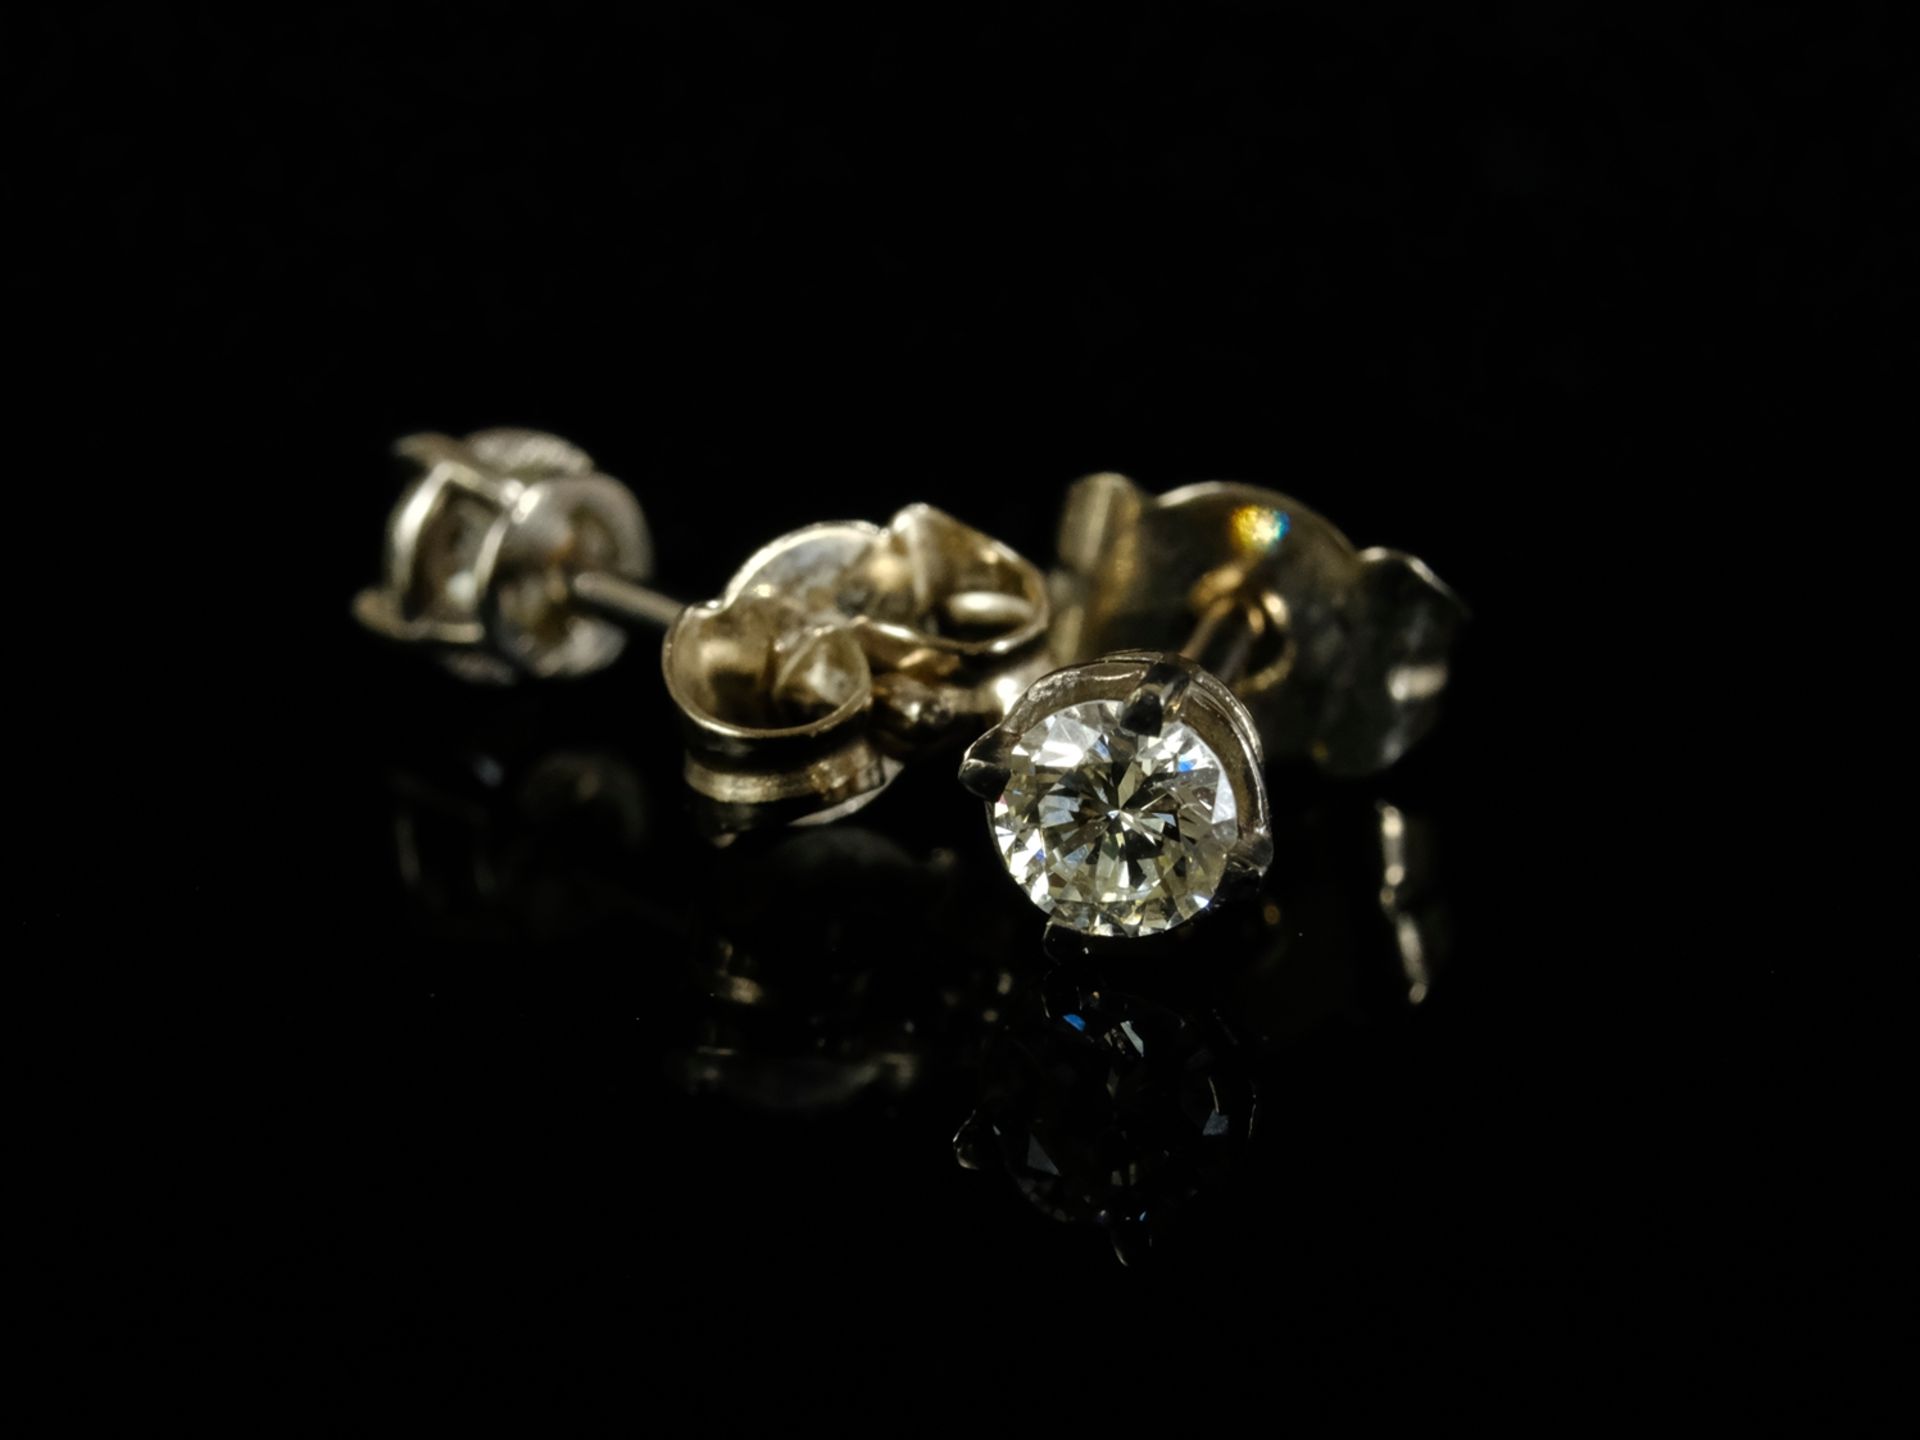 PAIR OF BRILLIANT EARPLACES, each with a brilliant-cut diamond in a fancy setting, total around 0.4